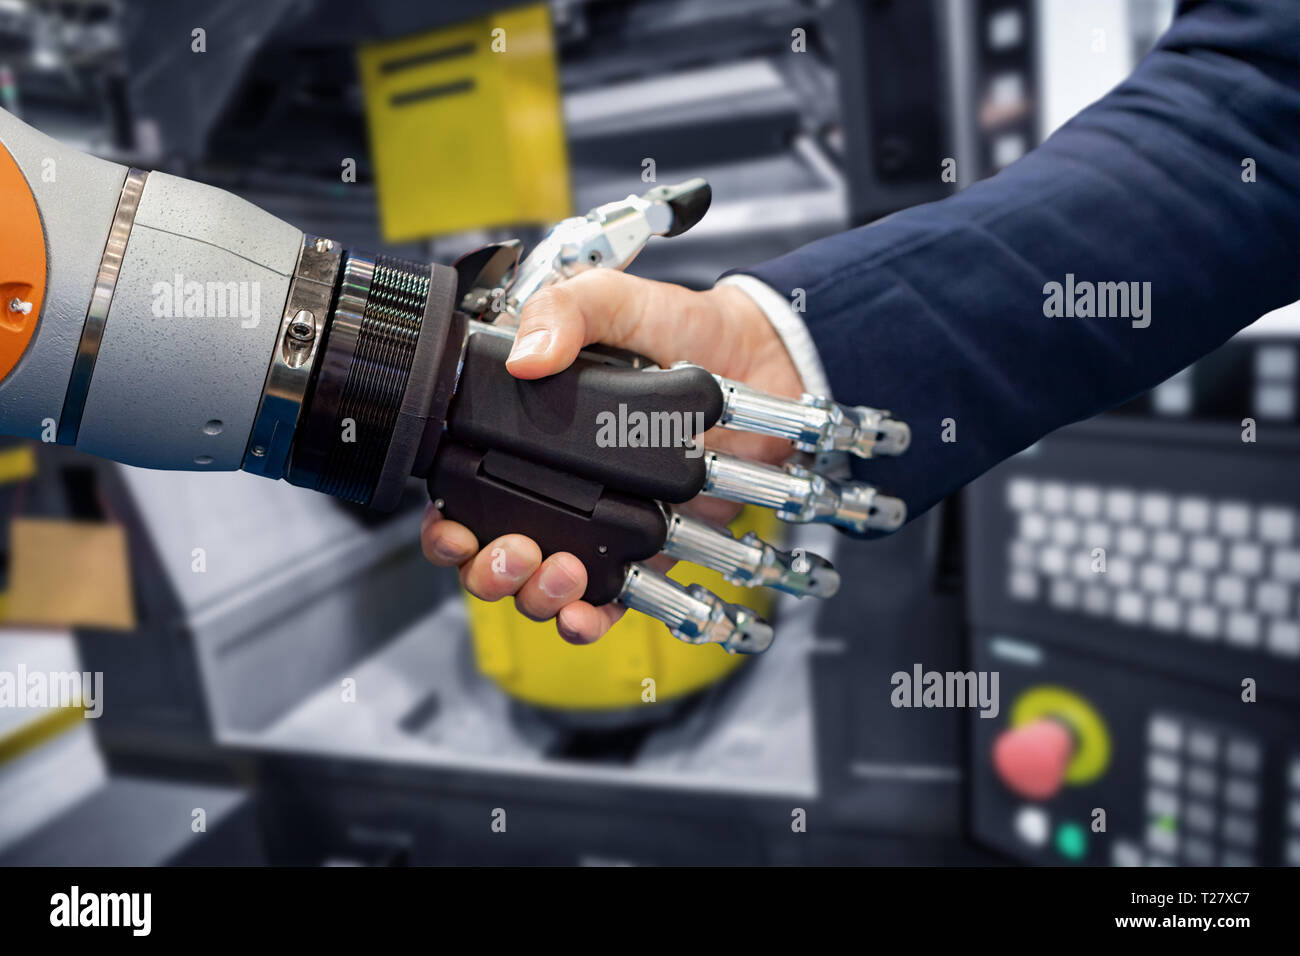 Hand of a businessman shaking hands with a Android robot. The concept of human interaction with artificial intelligence. Stock Photo